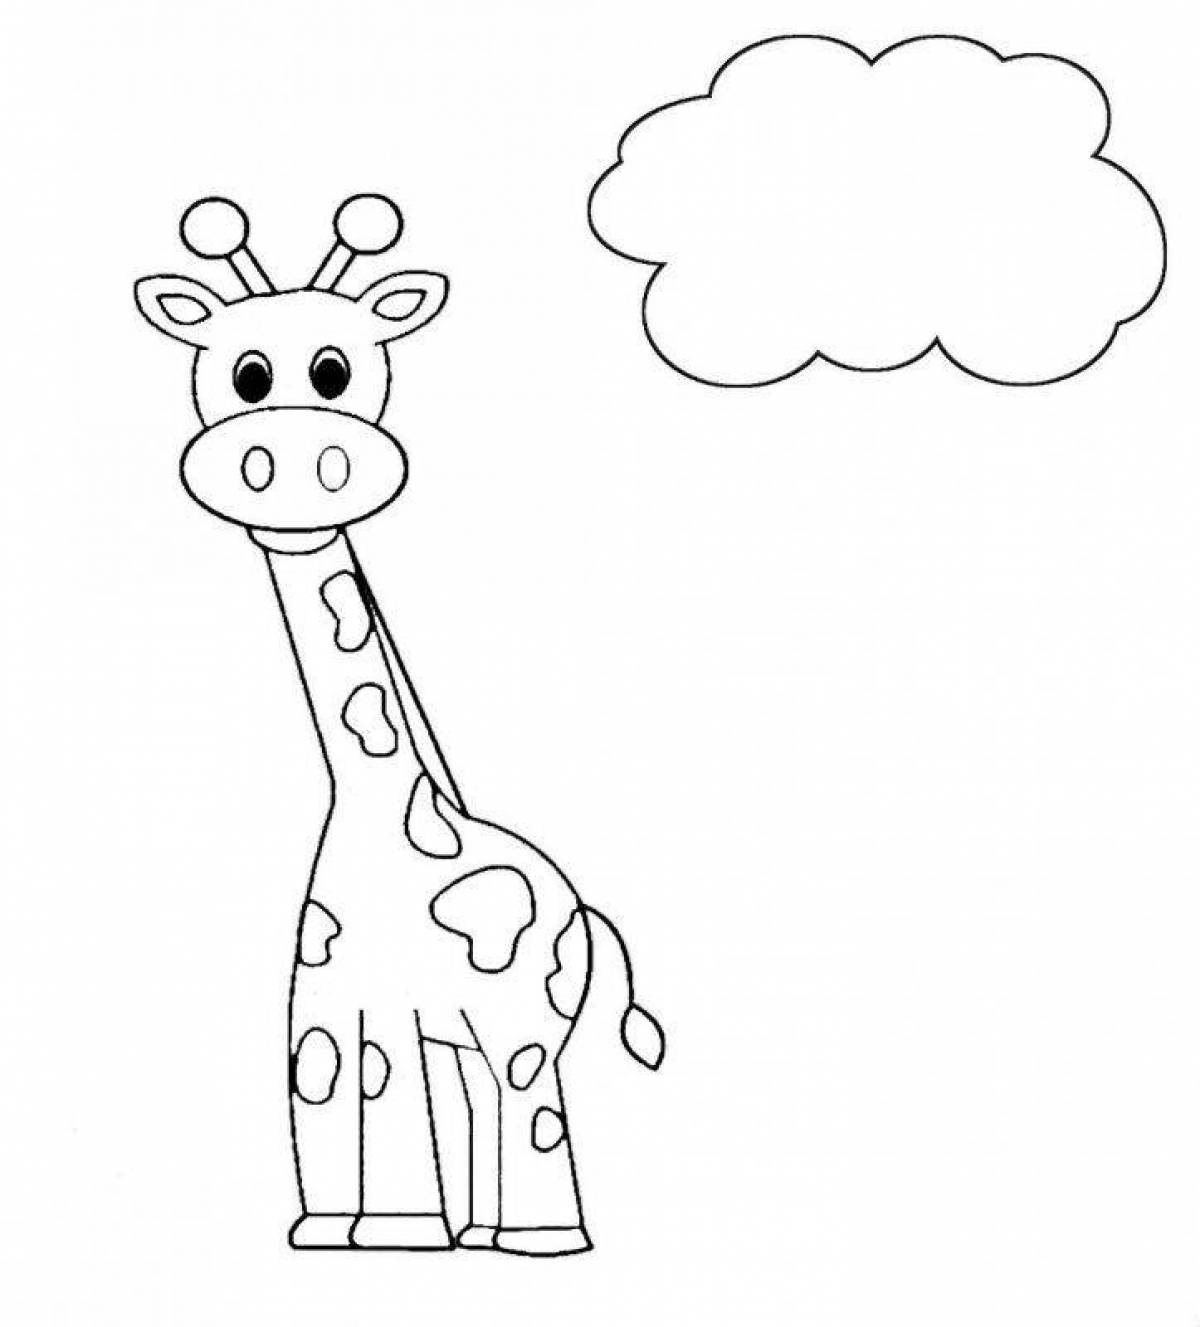 Exciting giraffe coloring book for kids